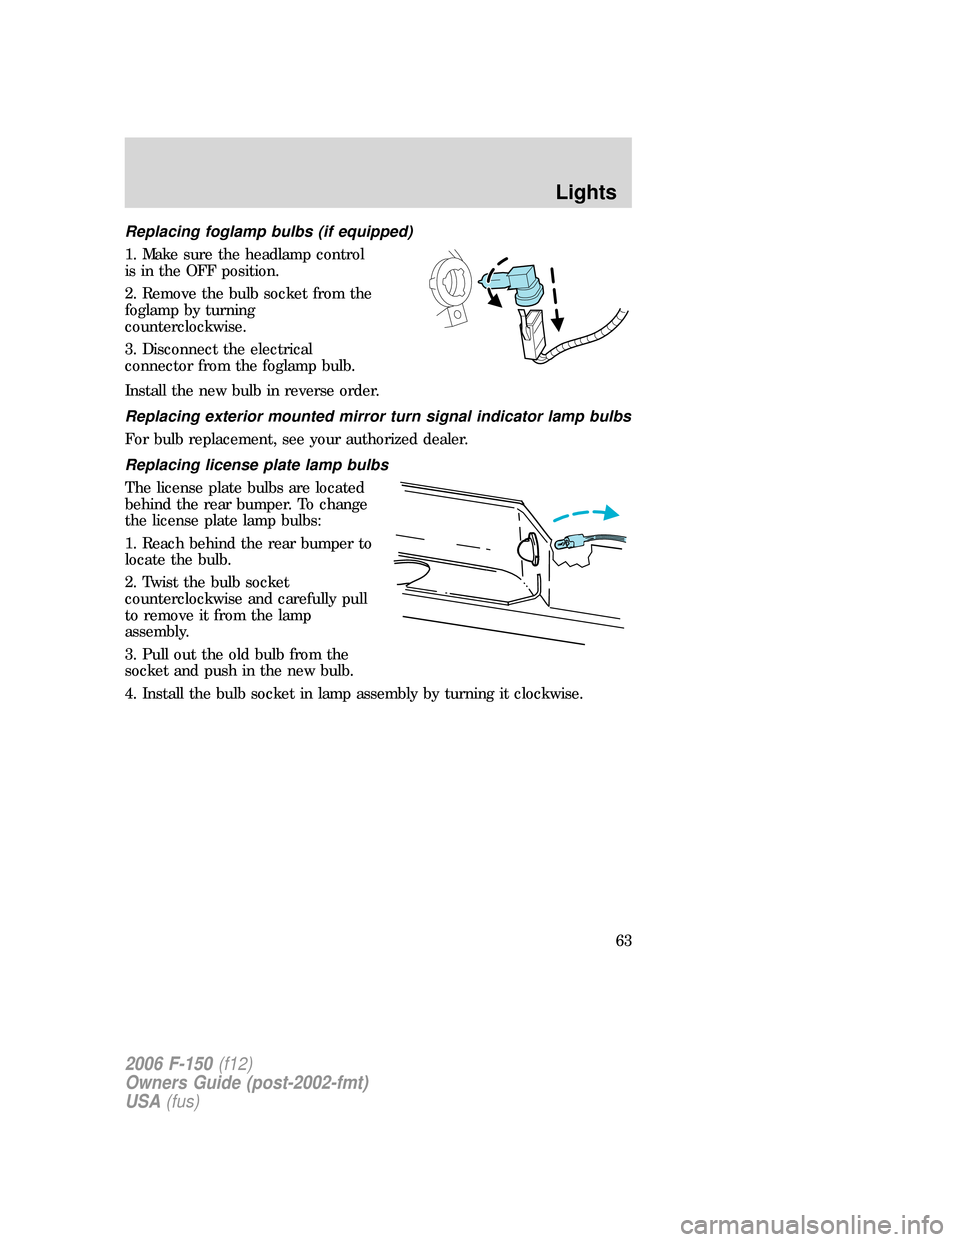 FORD F150 2006 11.G Owners Manual Replacing foglamp bulbs (if equipped)
1. Make sure the headlamp control
is in the OFF position.
2. Remove the bulb socket from the
foglamp by turning
counterclockwise.
3. Disconnect the electrical
con